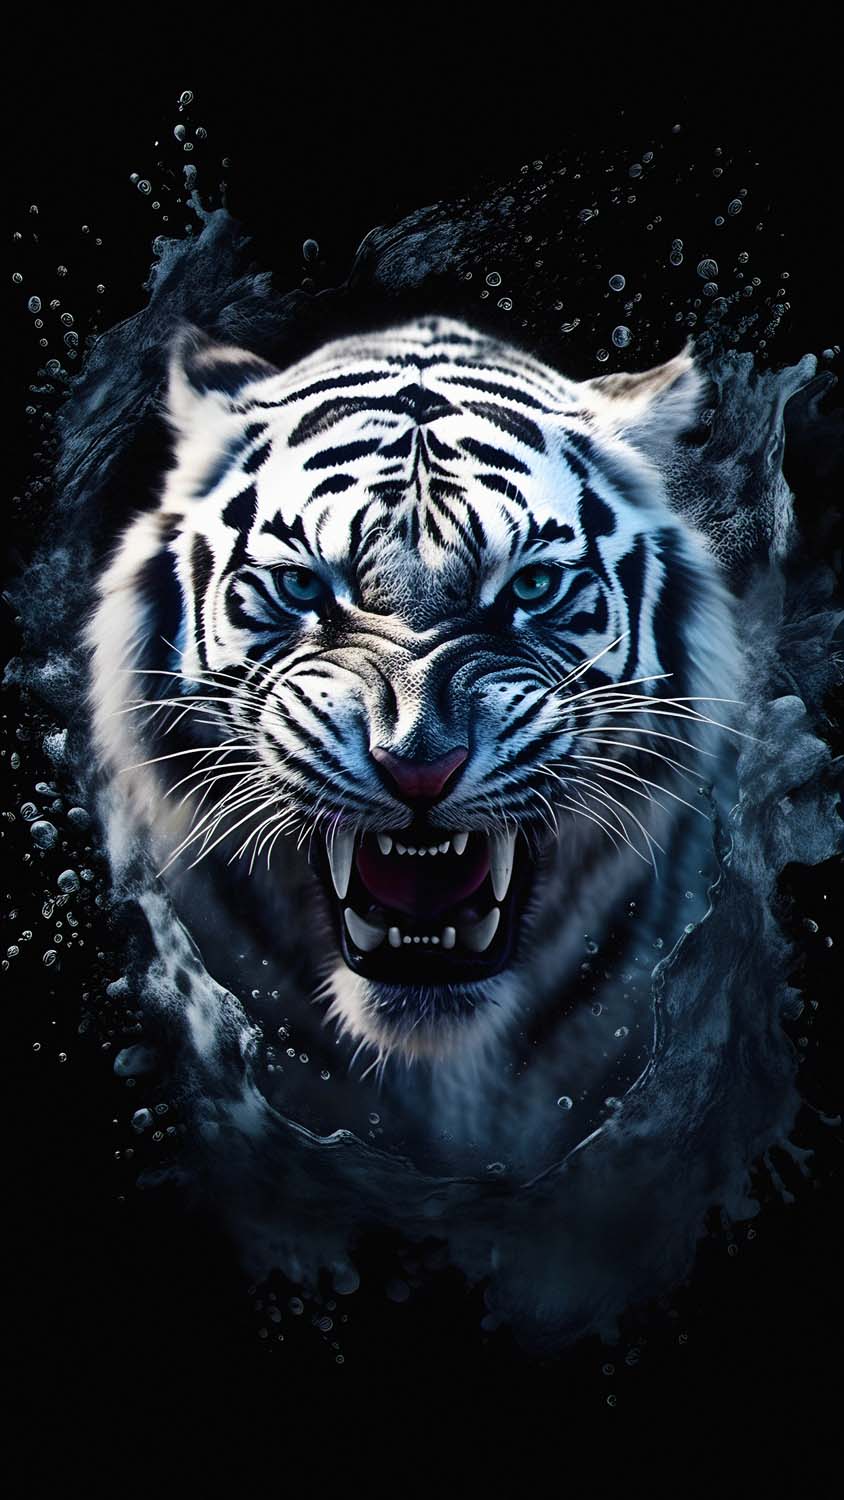 Tiger Angry iPhone Wallpaper 4K